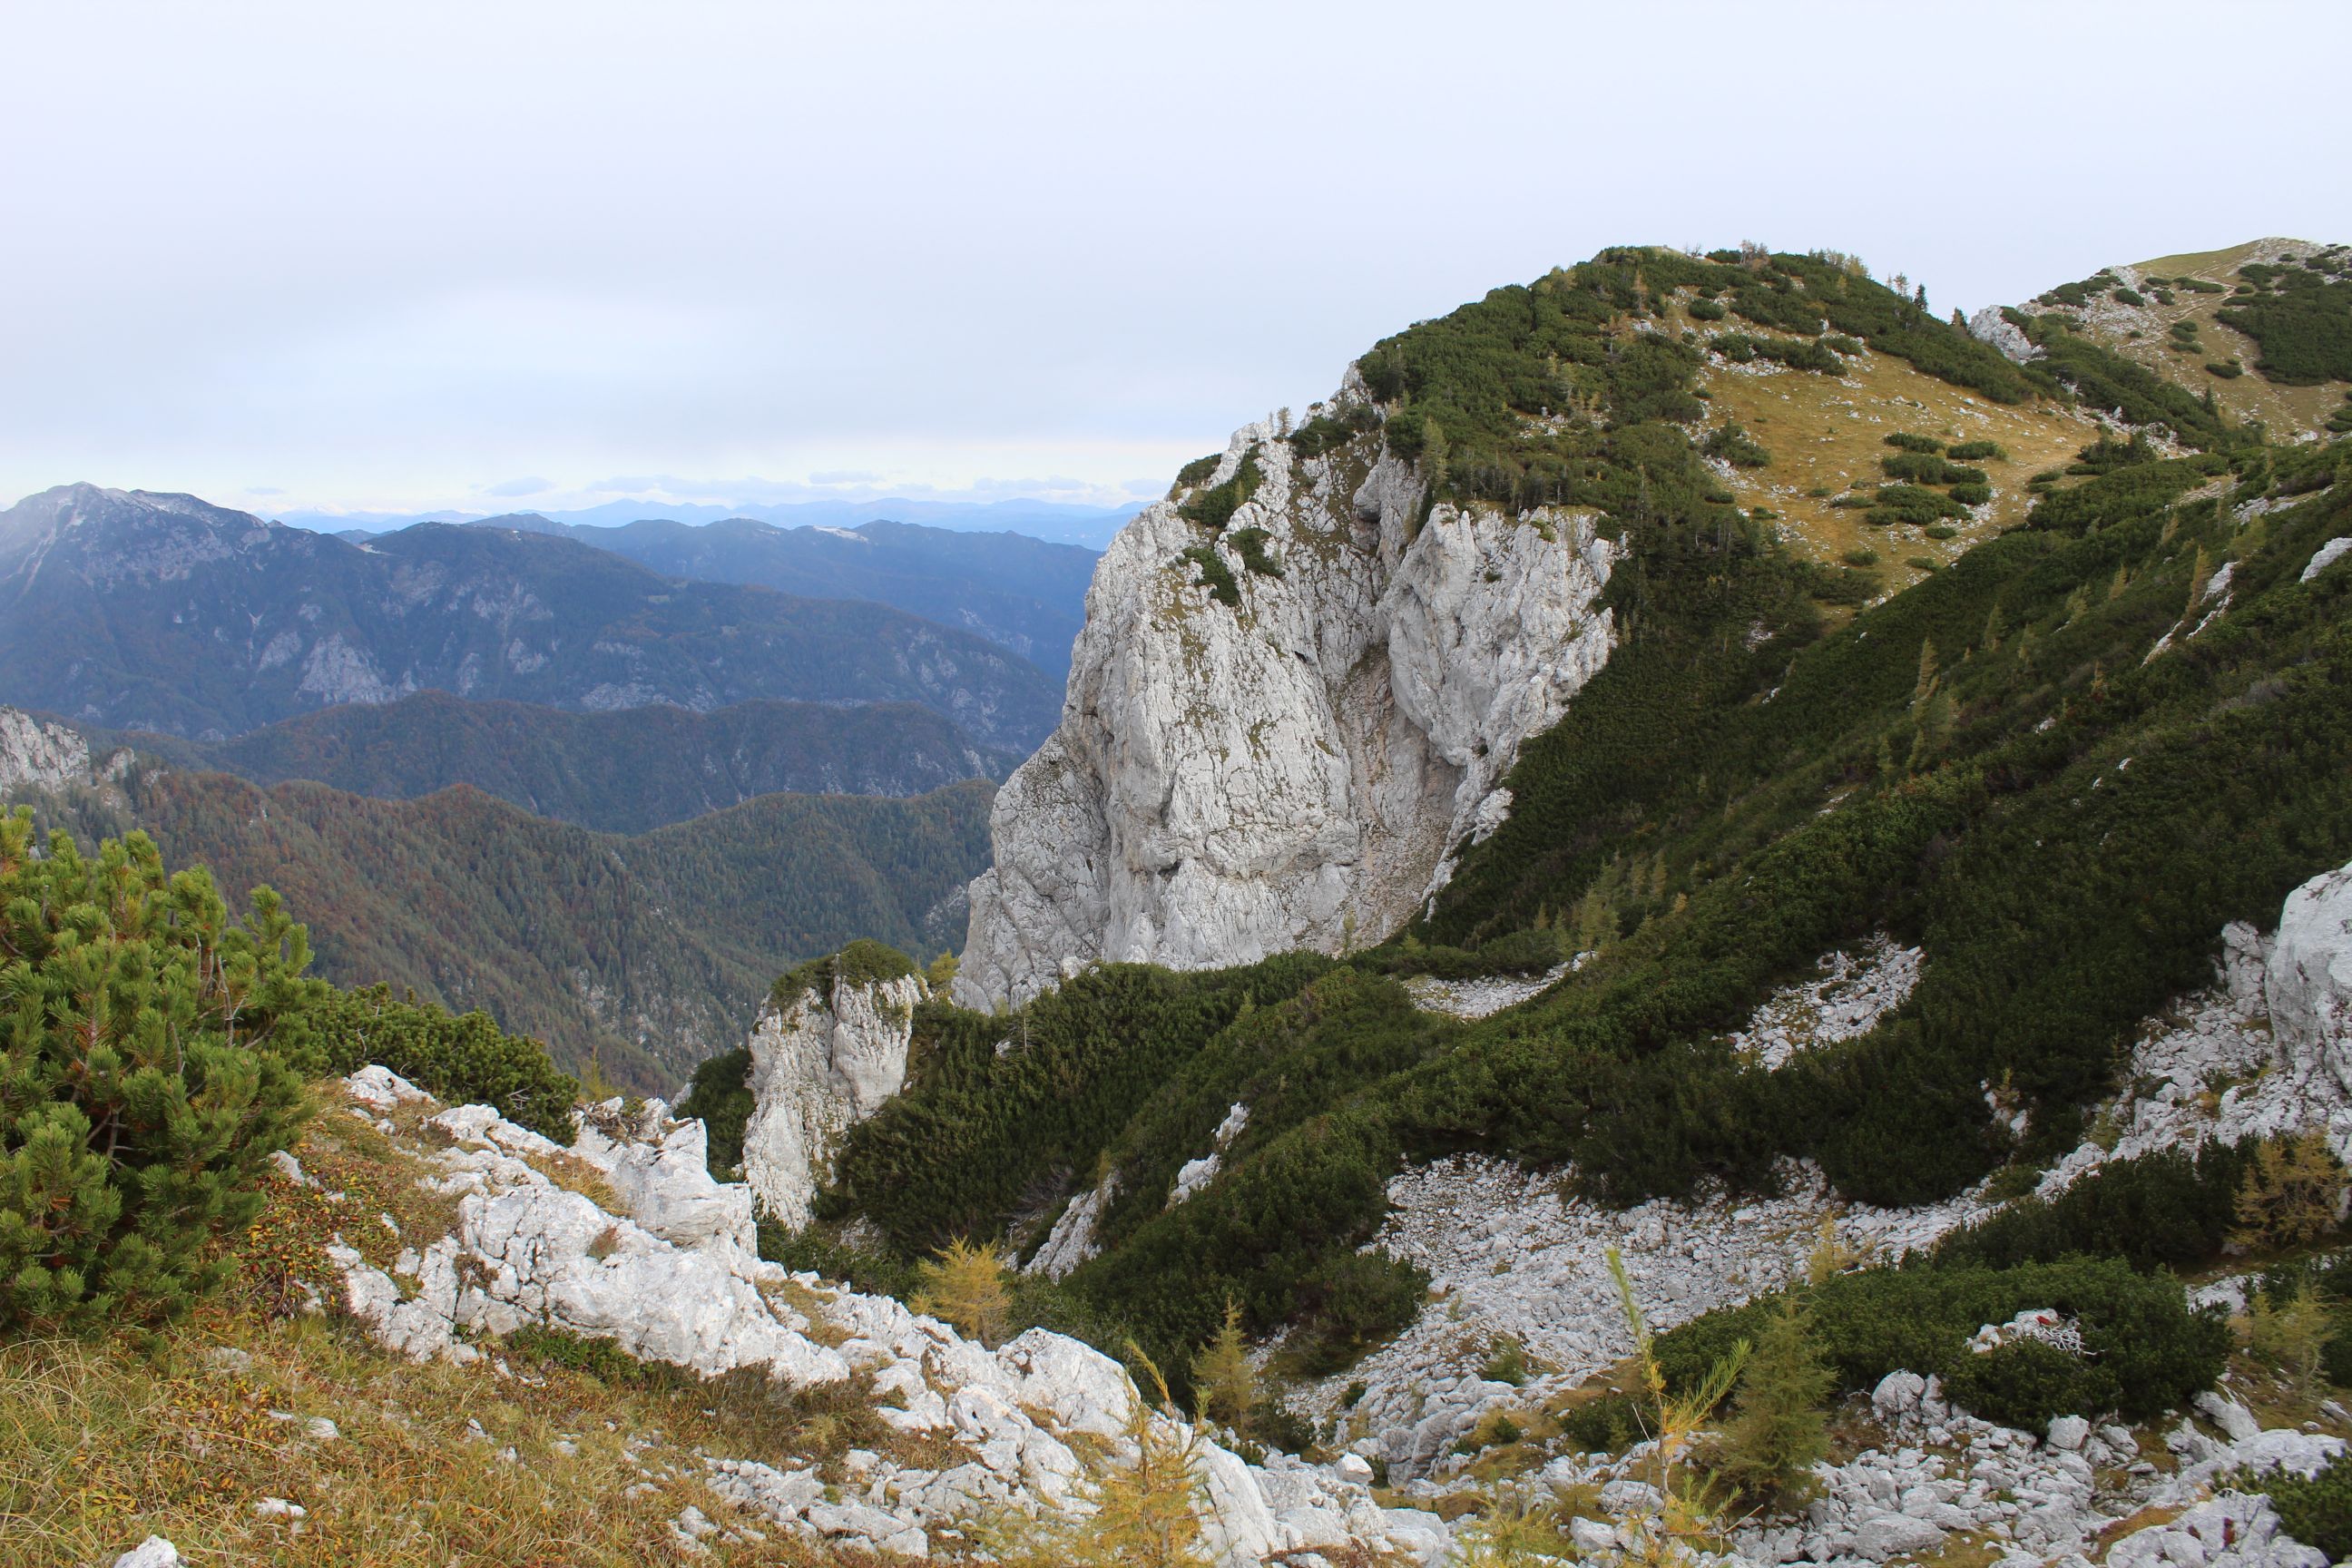 A limestone mountain in Slovenia, with forested slopes behind.